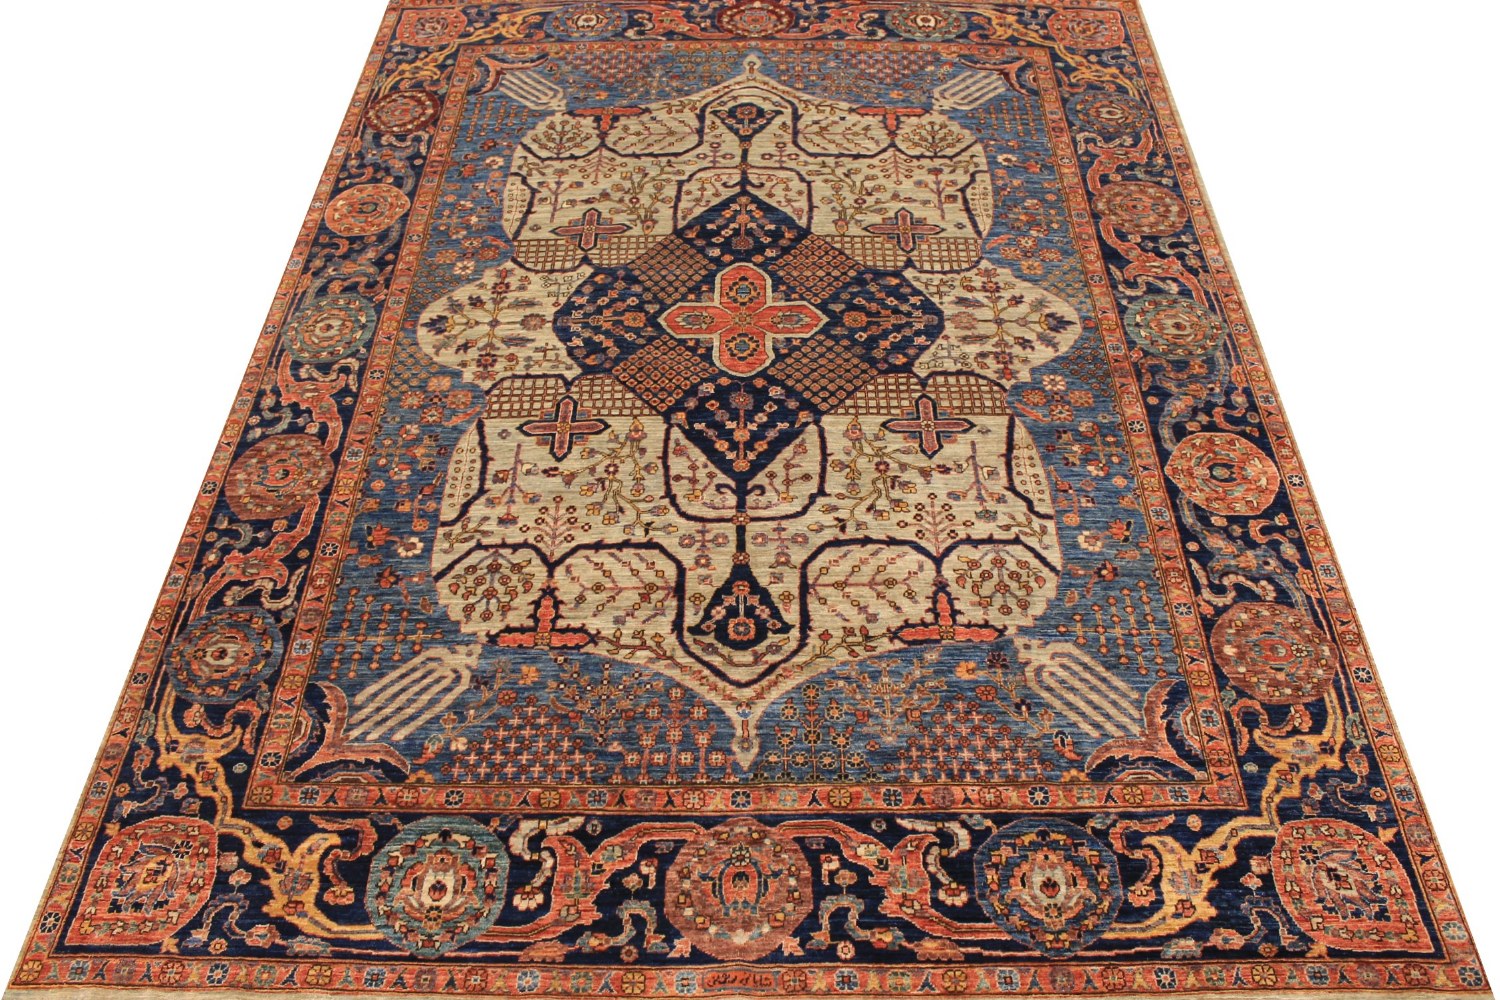 9x12 Aryana & Antique Revivals Hand Knotted Wool Area Rug - MR028854